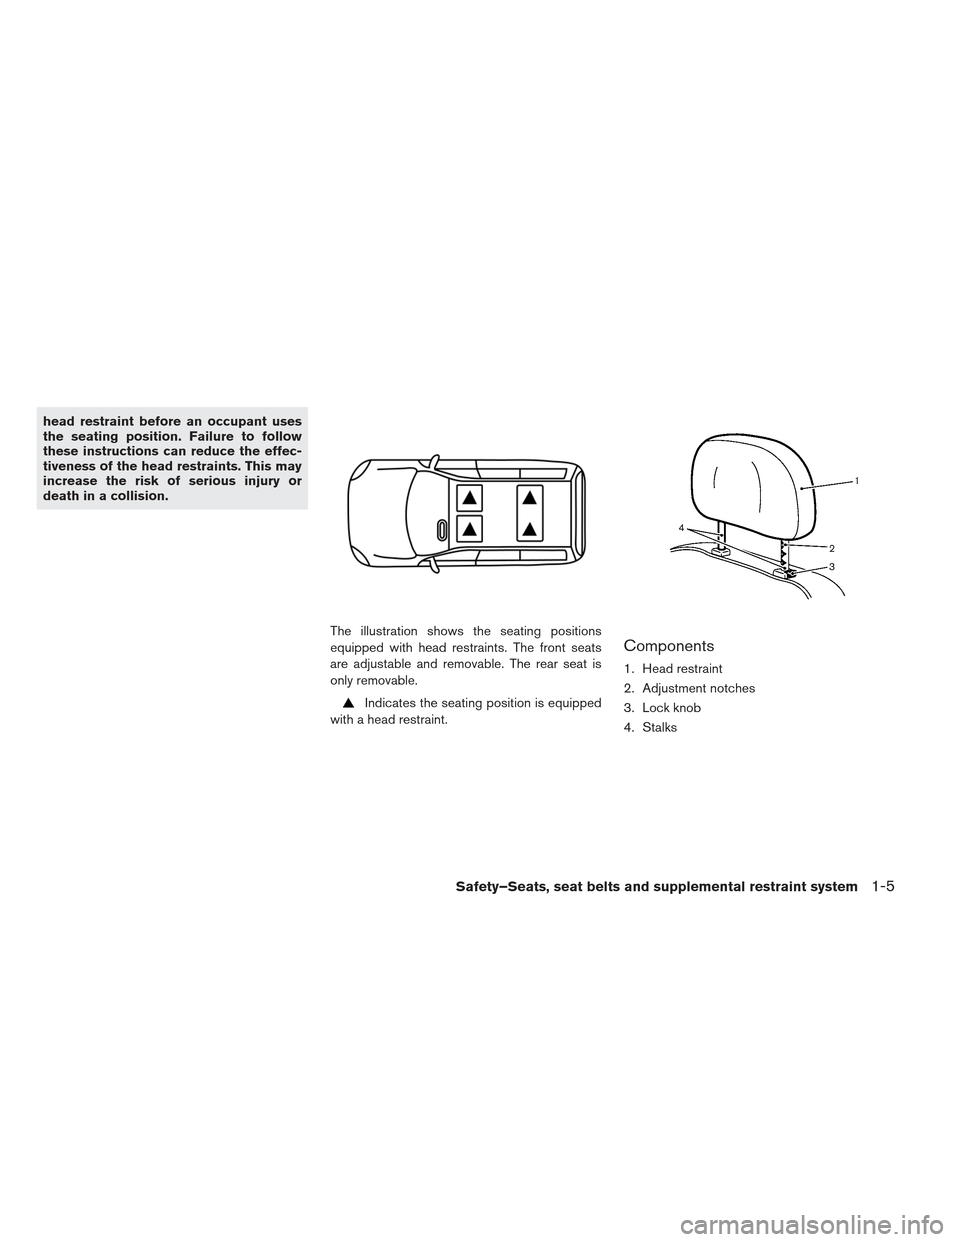 NISSAN LEAF 2013 1.G Owners Manual head restraint before an occupant uses
the seating position. Failure to follow
these instructions can reduce the effec-
tiveness of the head restraints. This may
increase the risk of serious injury or